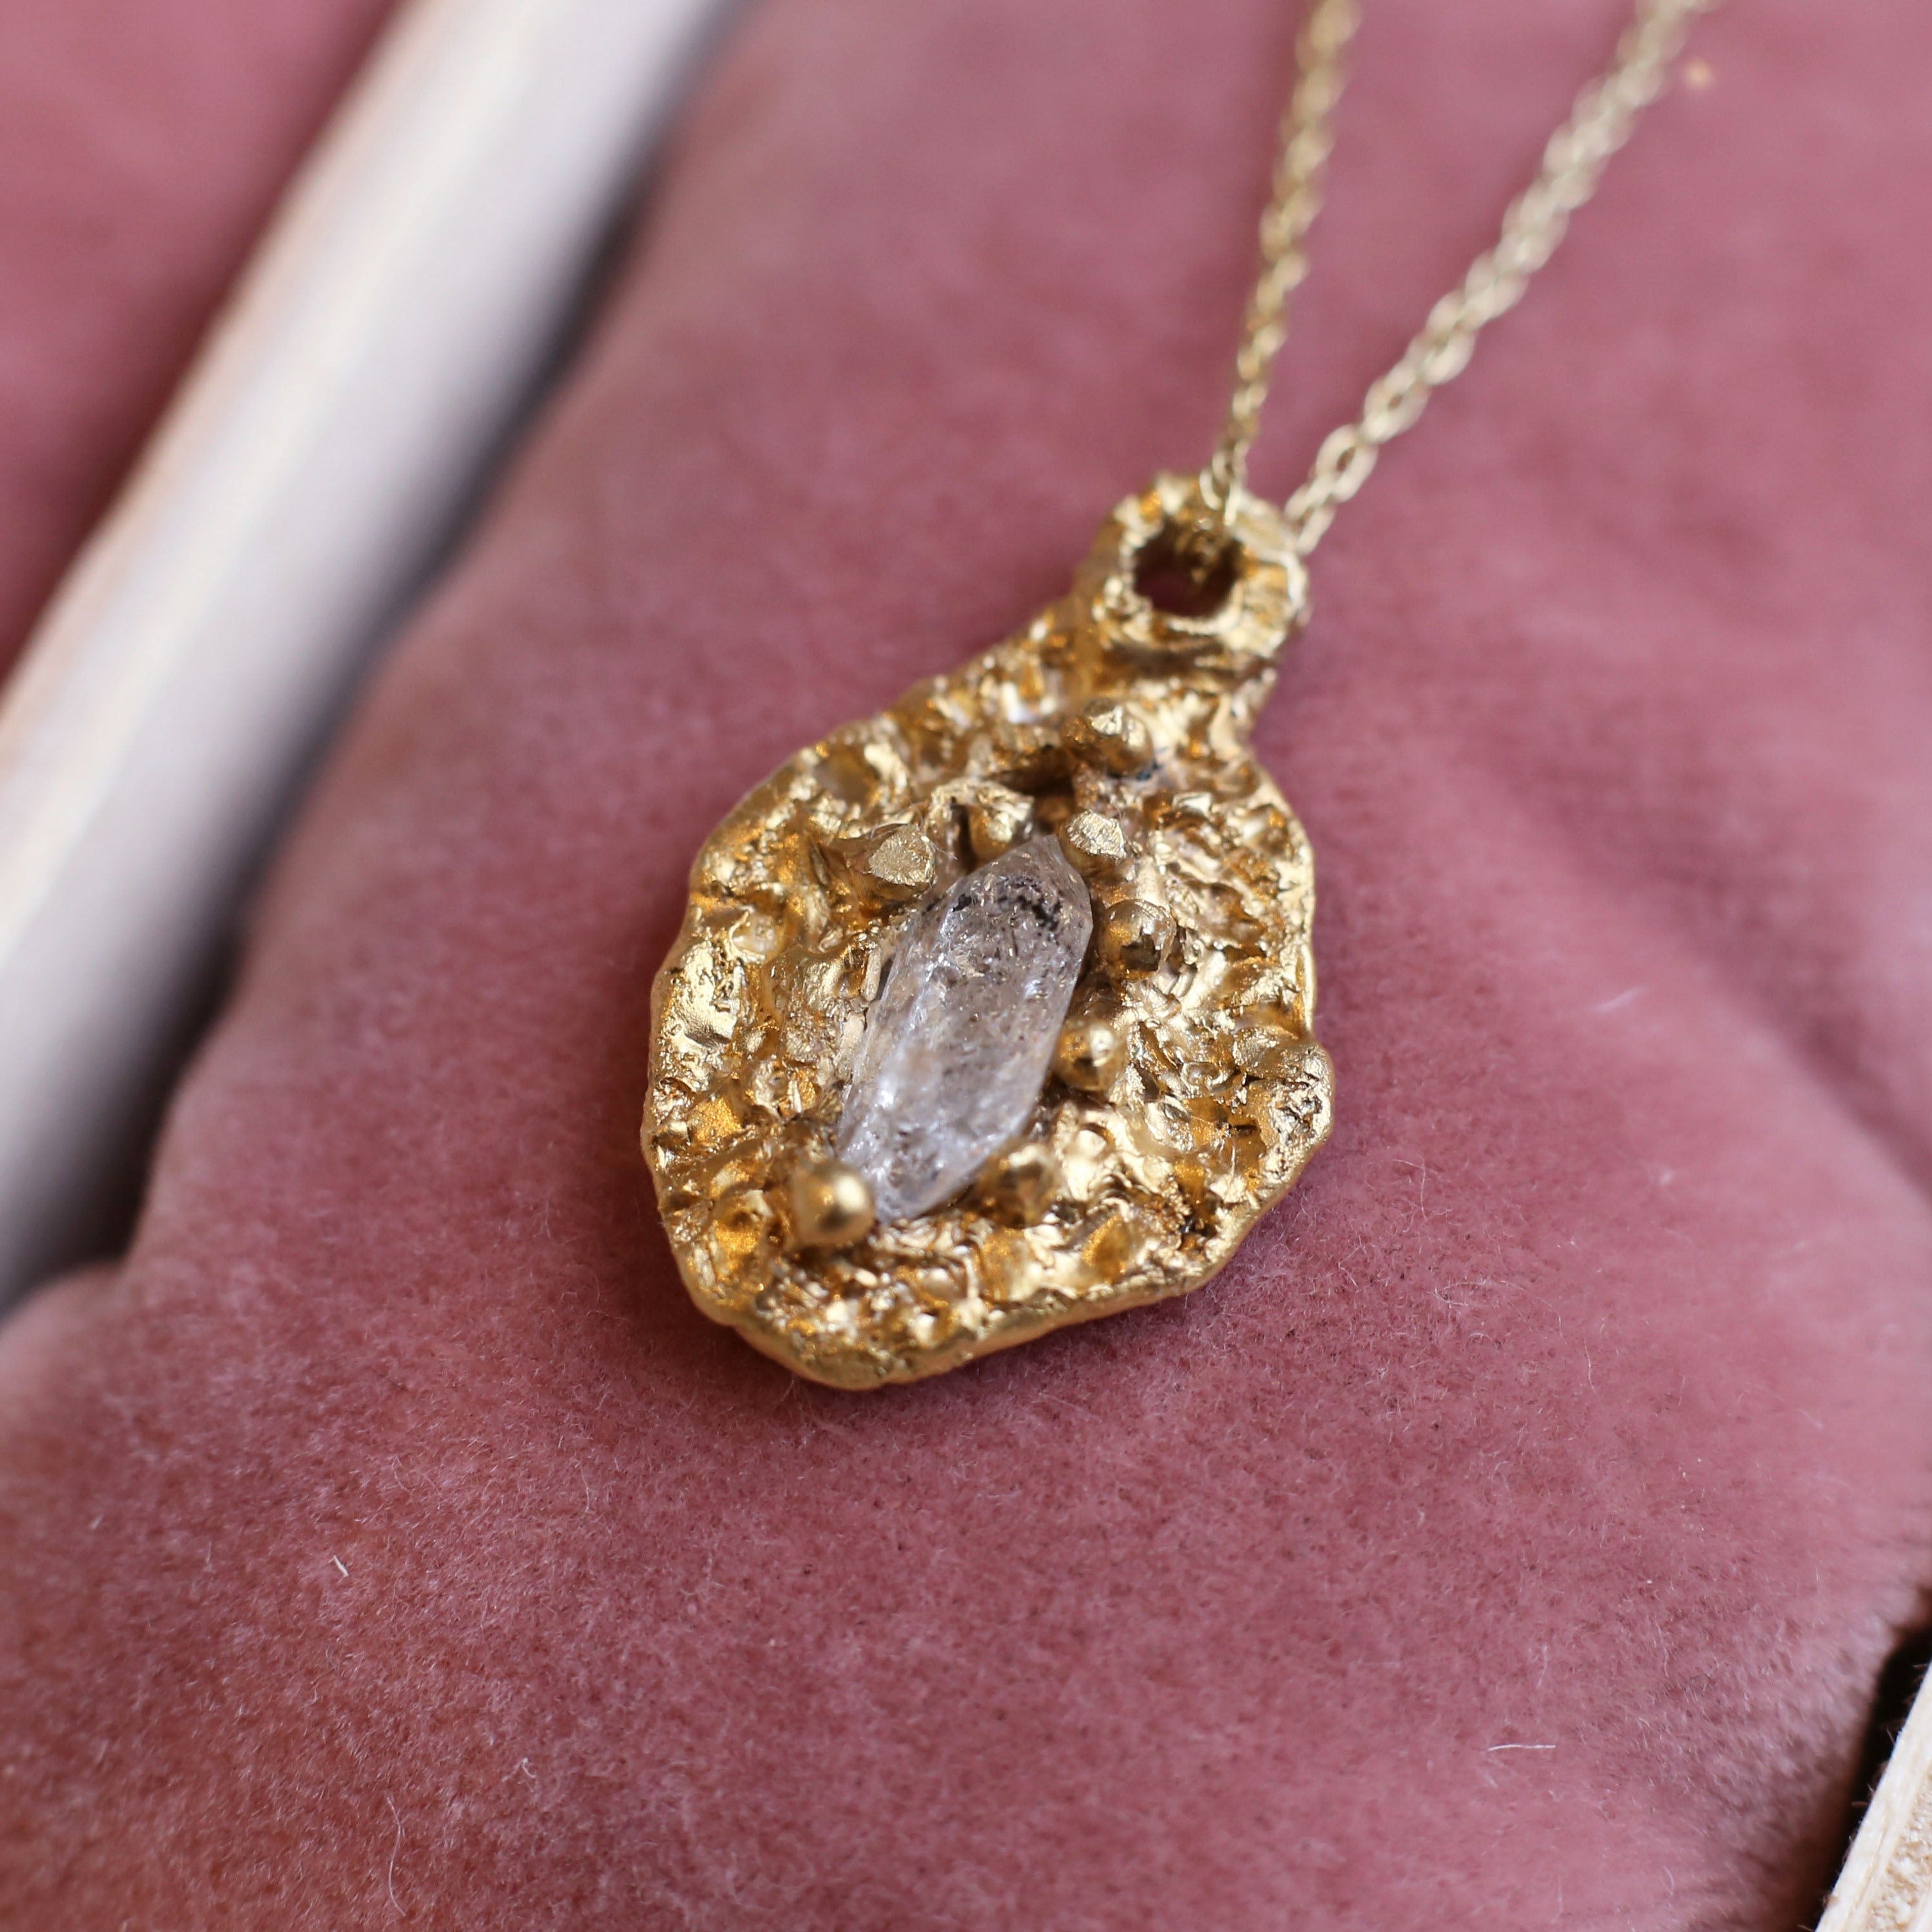 The Zeus Herkimer Necklace, gold plater sterling silver pendant necklace